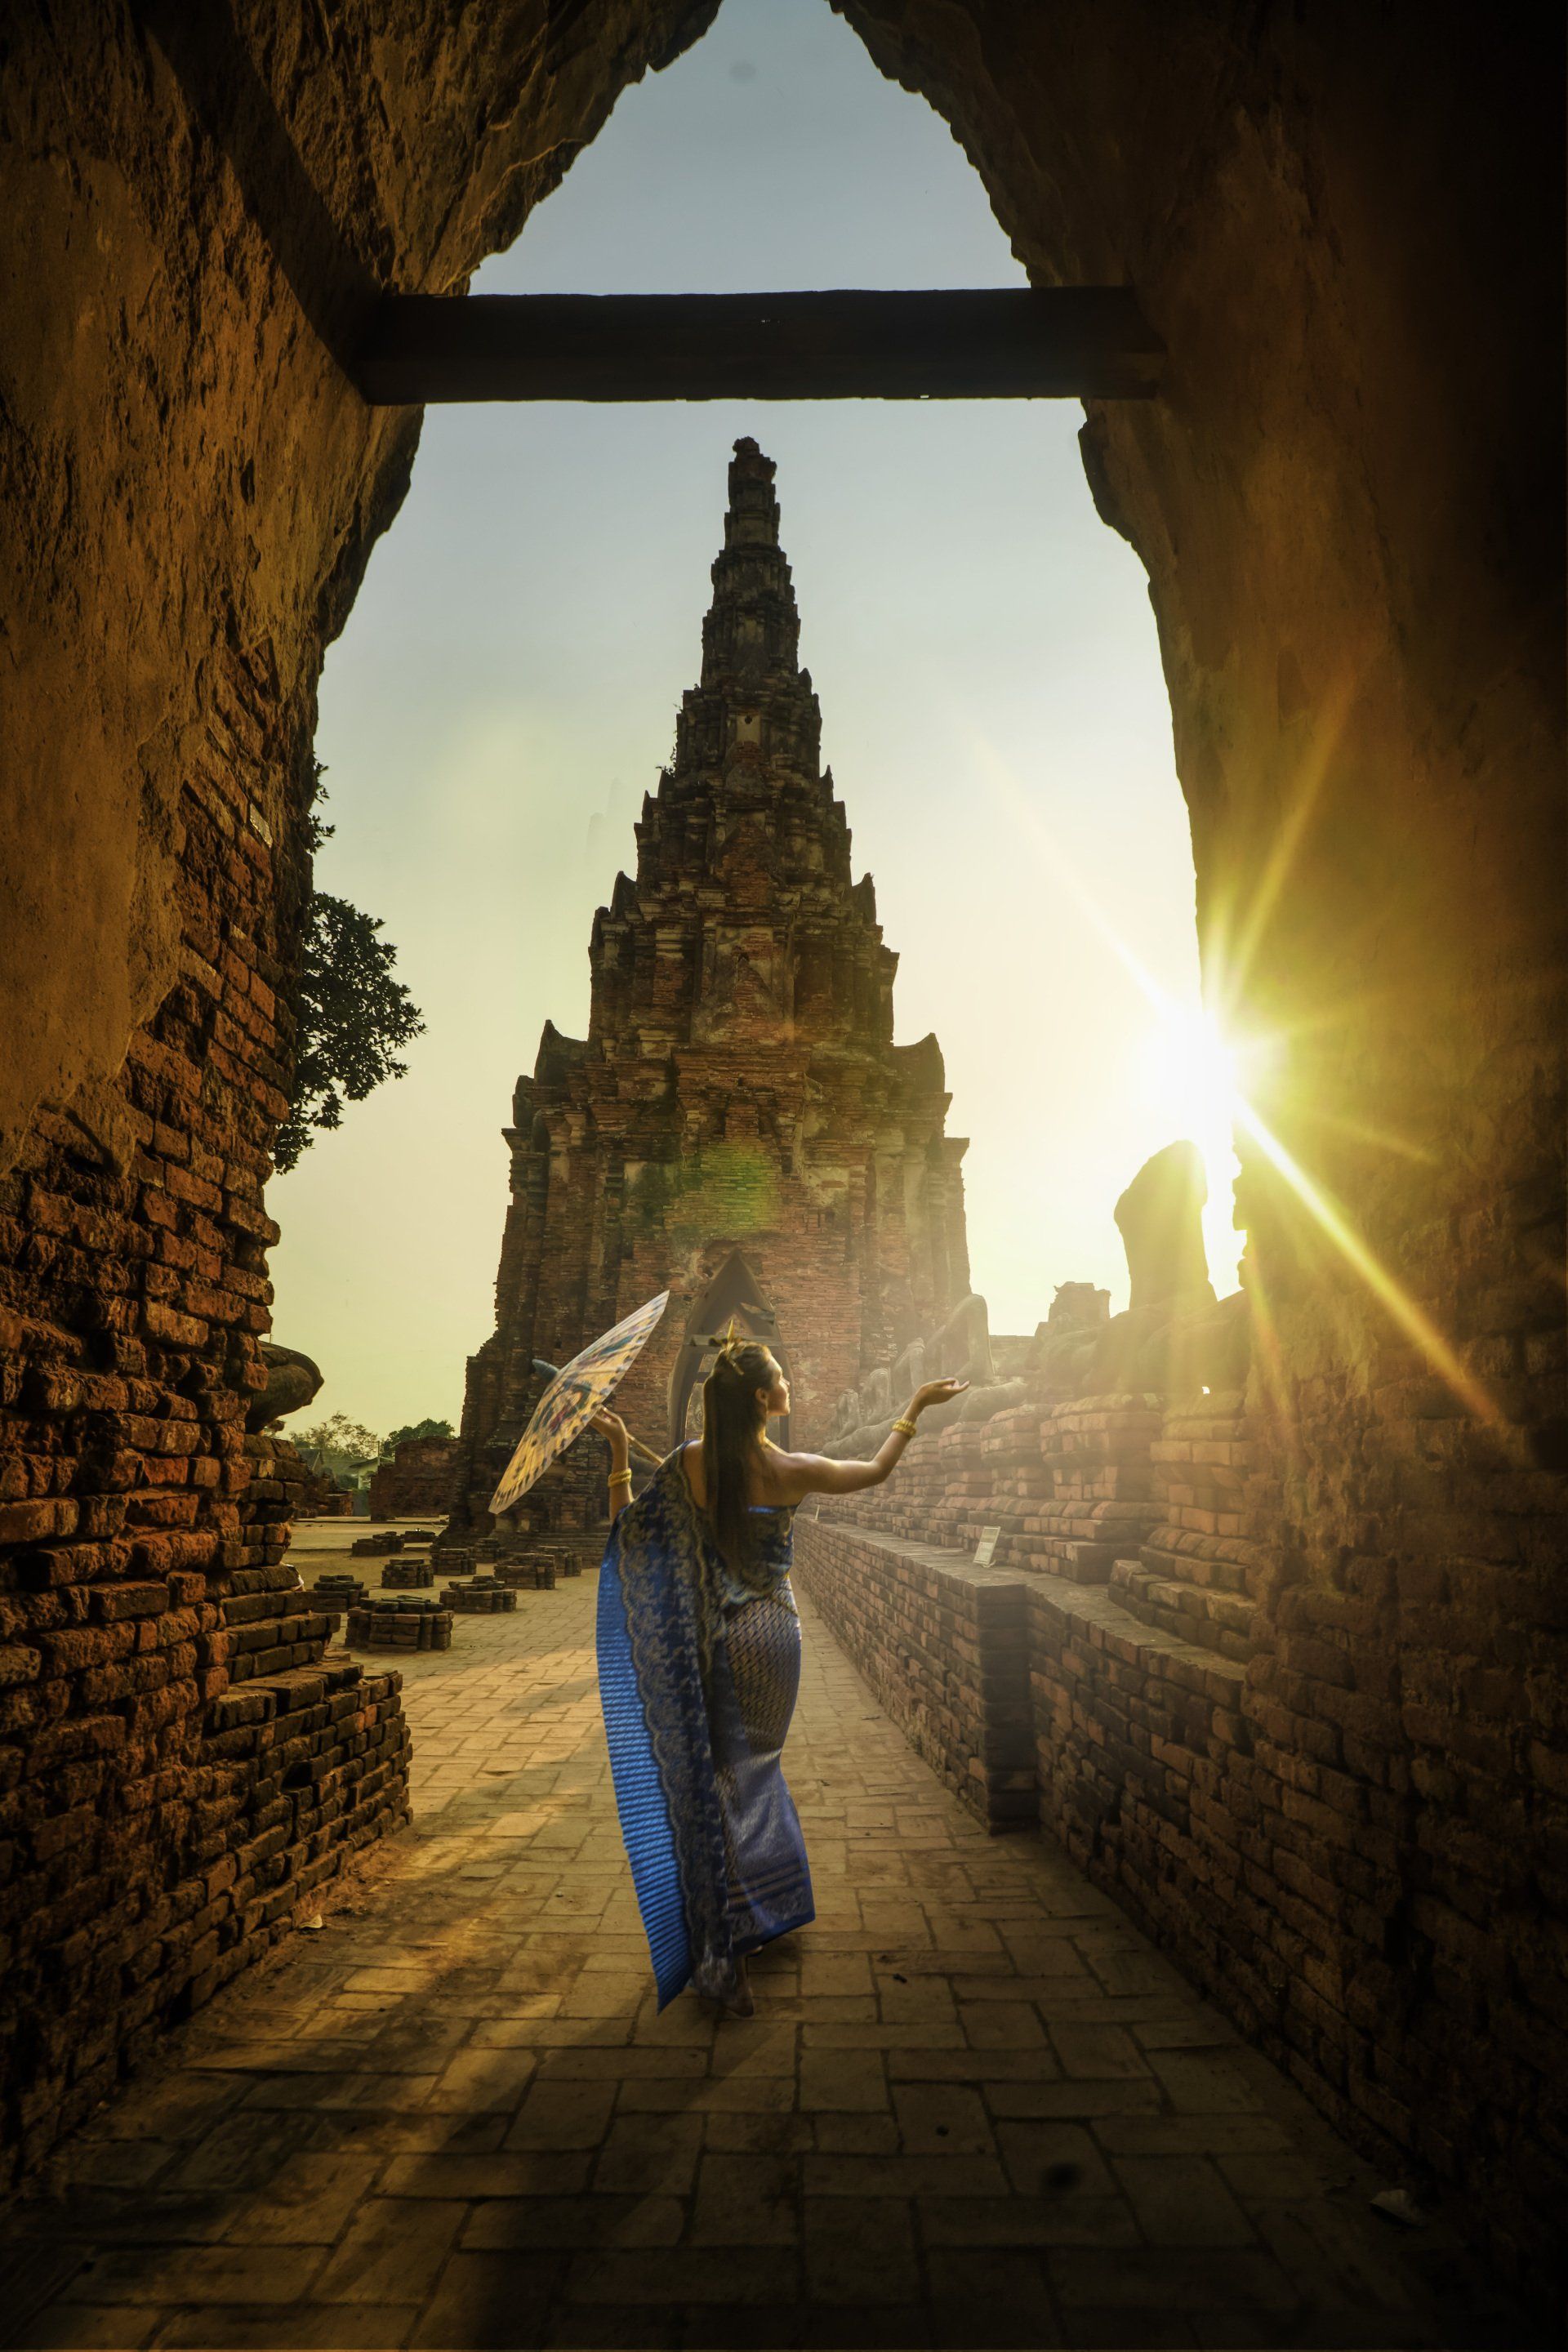 A woman in a blue dress is walking through a tunnel towards a temple.